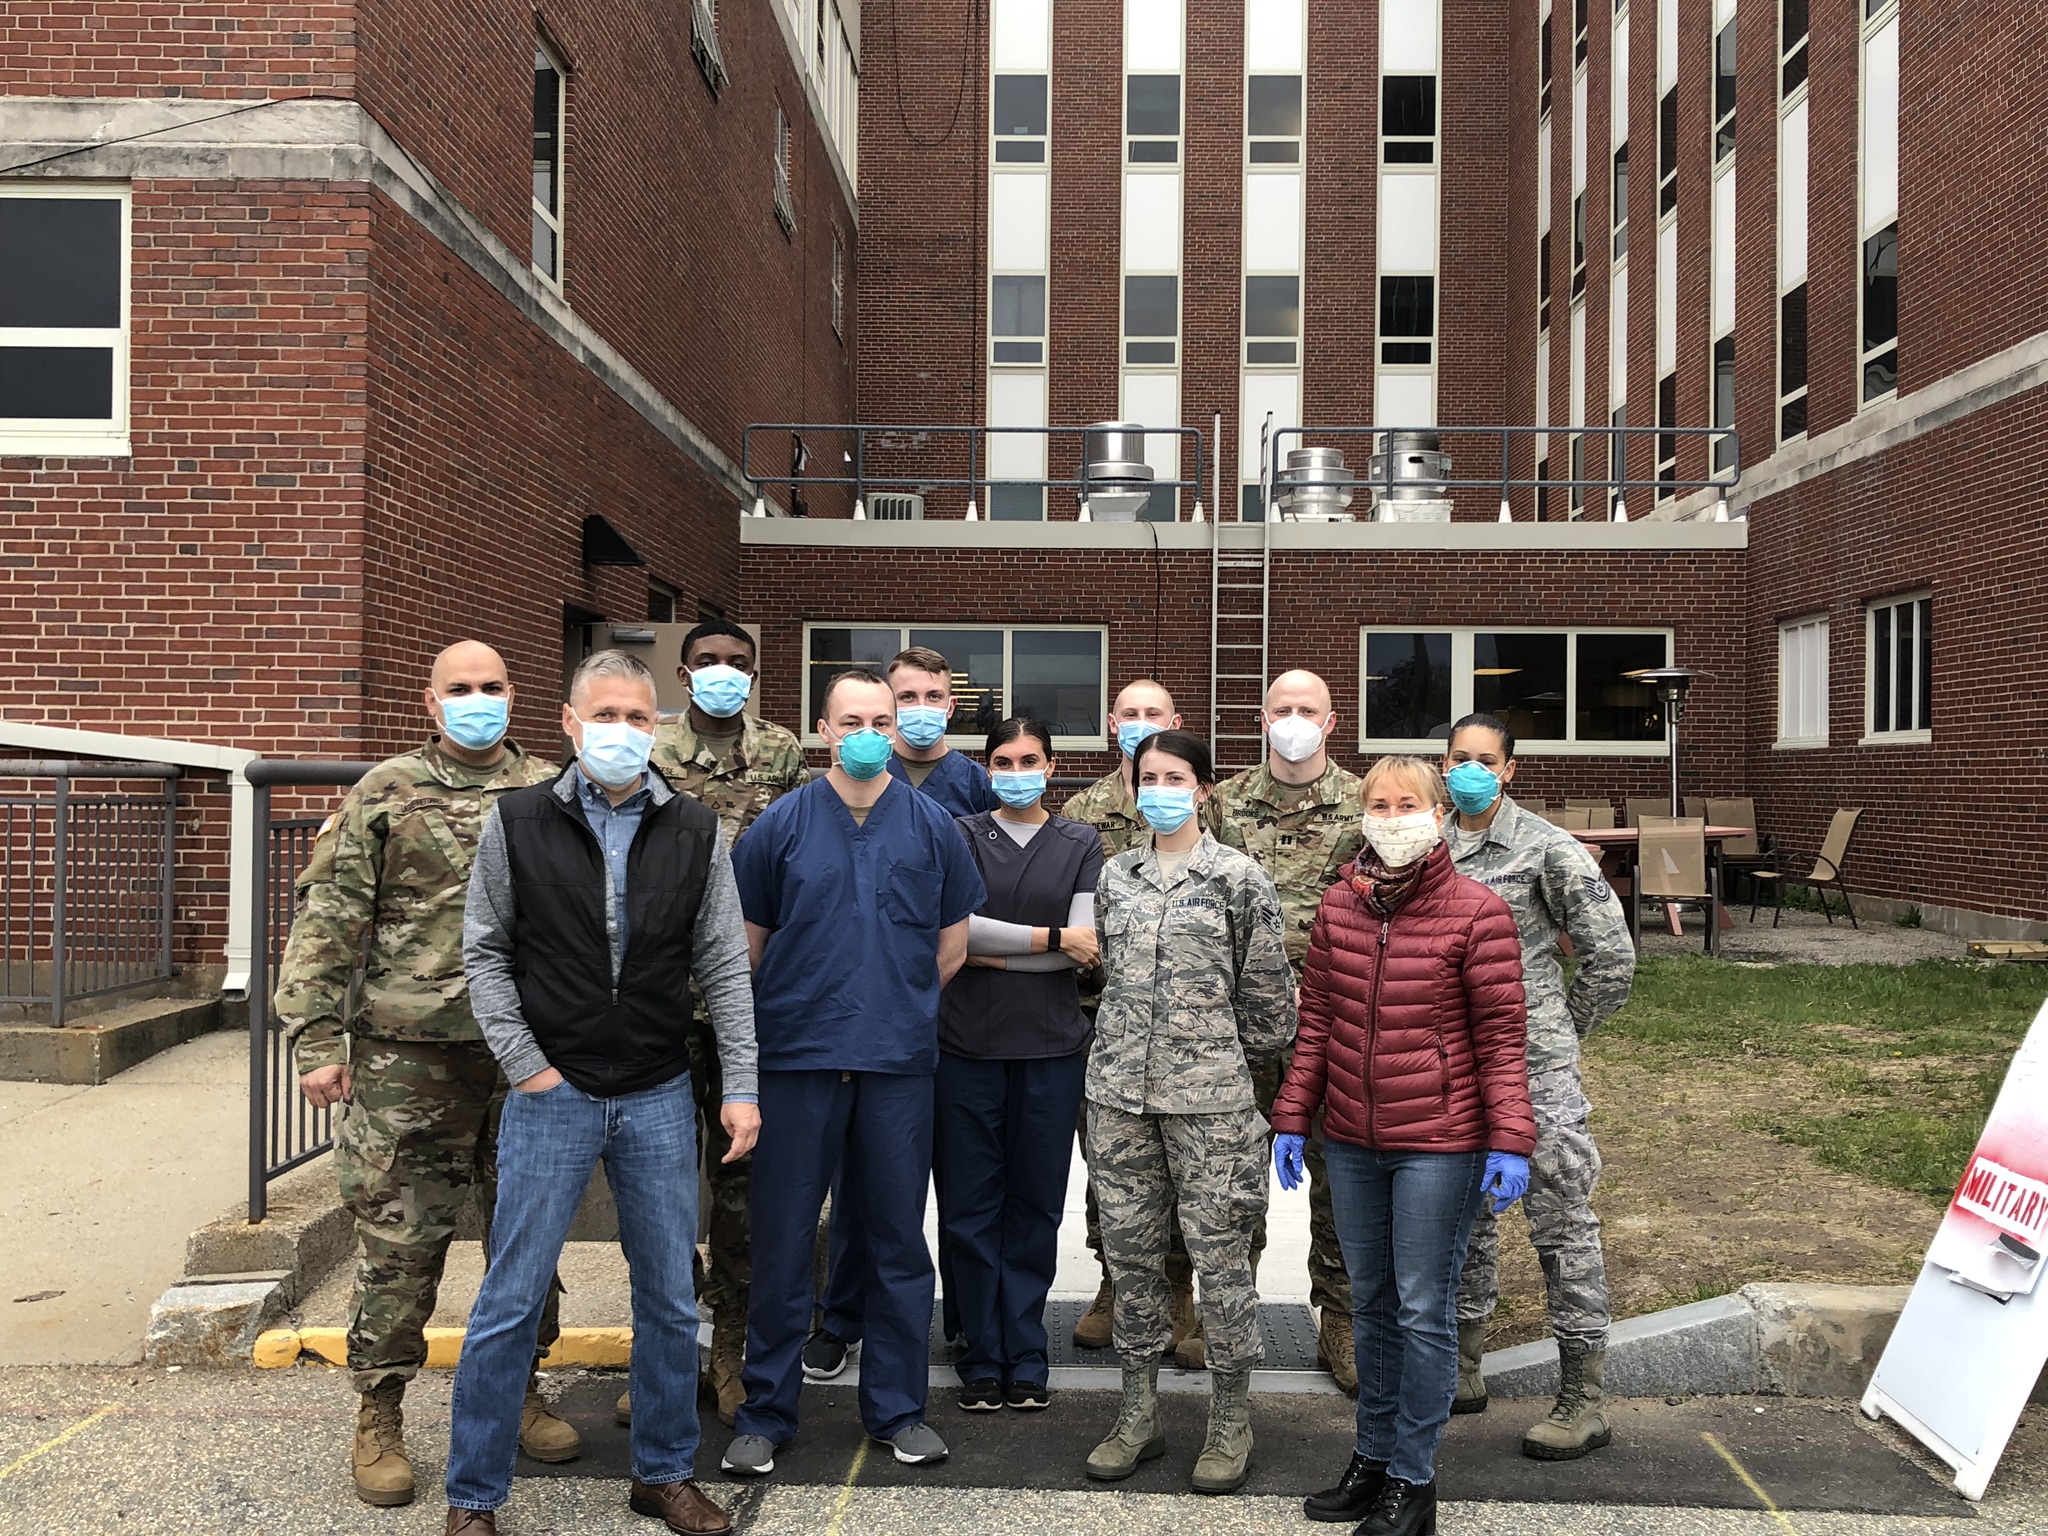 Group of military members, first responders and medical workers outside of a building, Pioneer Valley Financial Group, PV Financial Group charitable work, Pioneer Valley Financial Group and Mill's Tavern